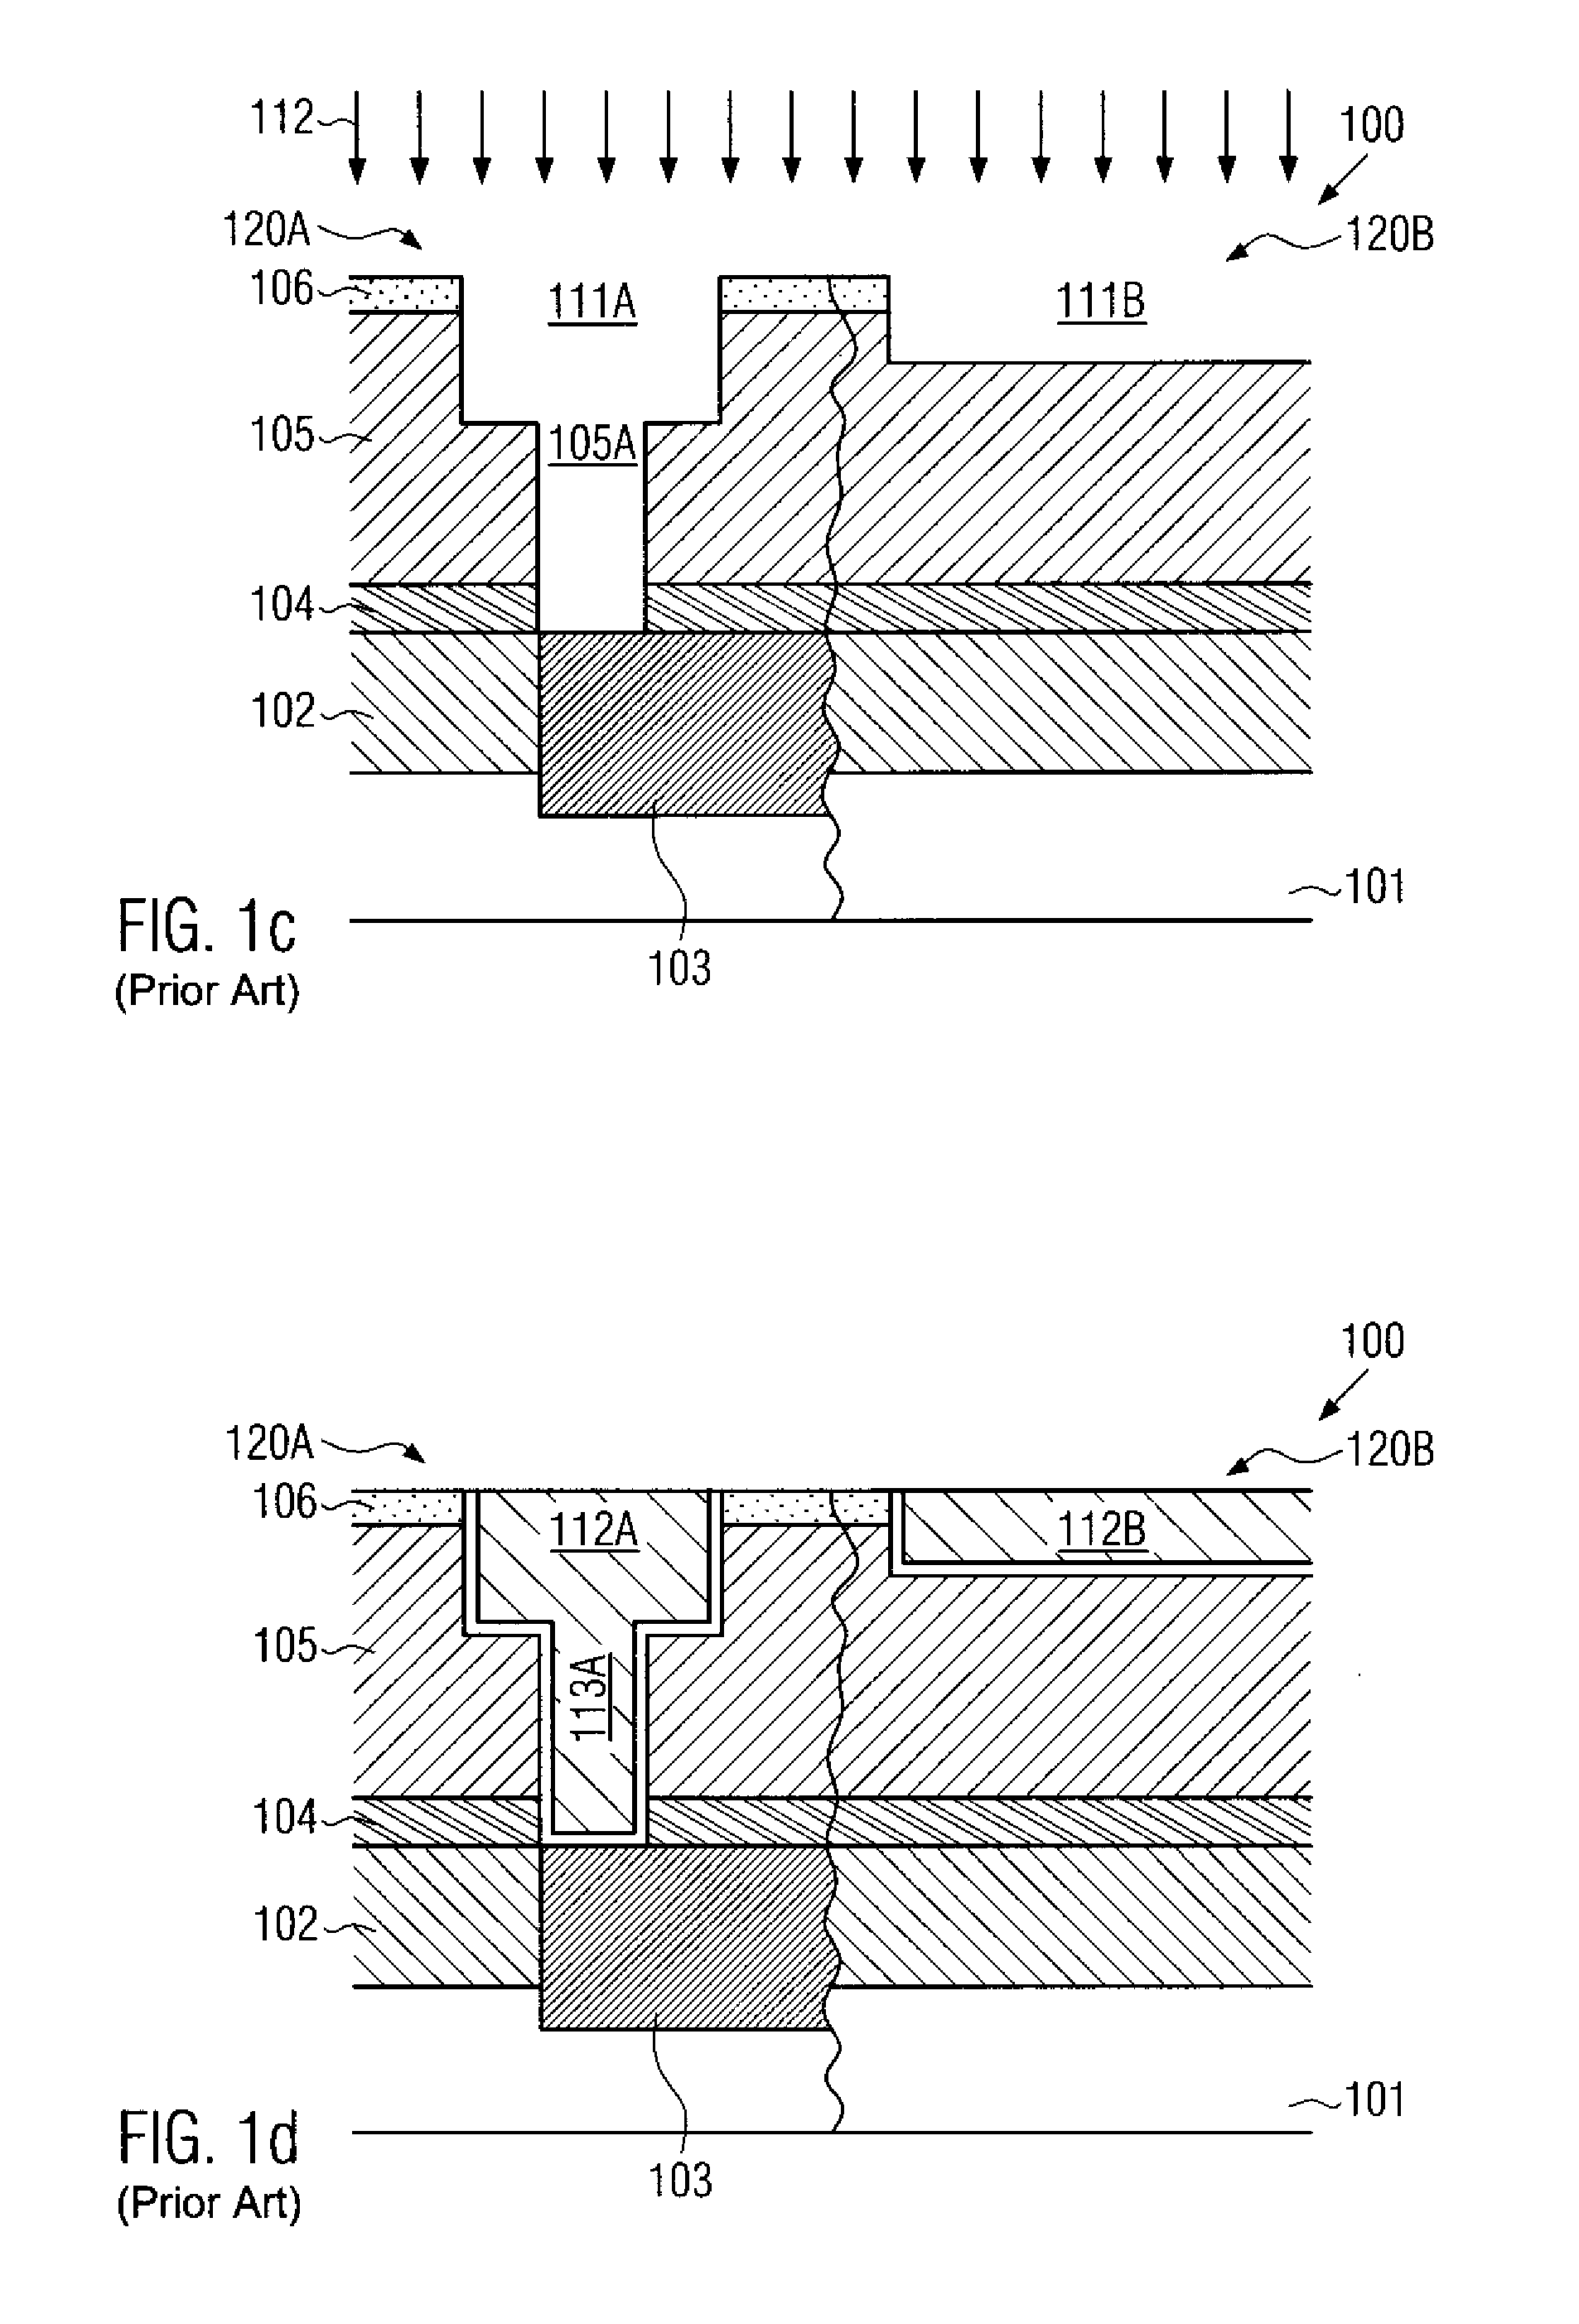 Technique for increasing adhesion of metallization layers by providing dummy vias